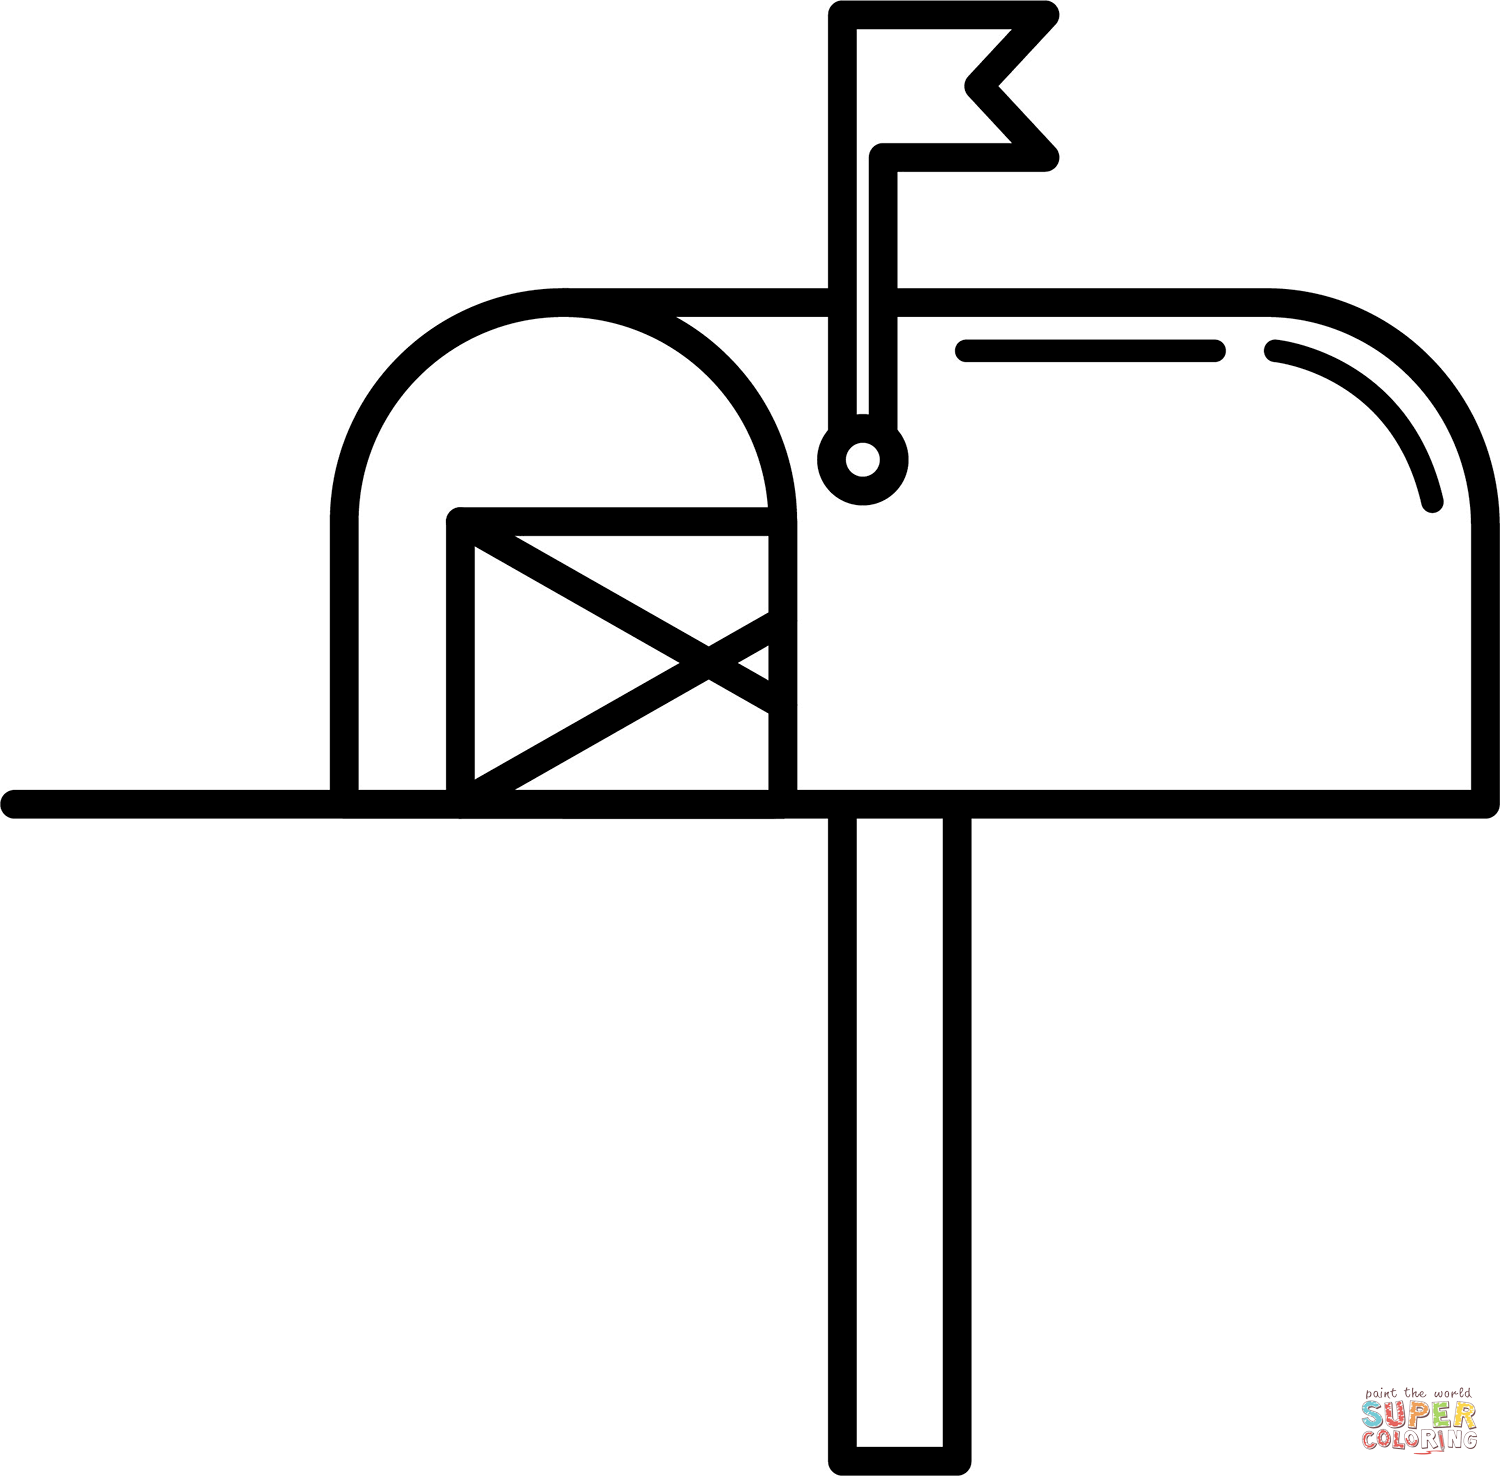 Mailbox coloring page free printable coloring pages